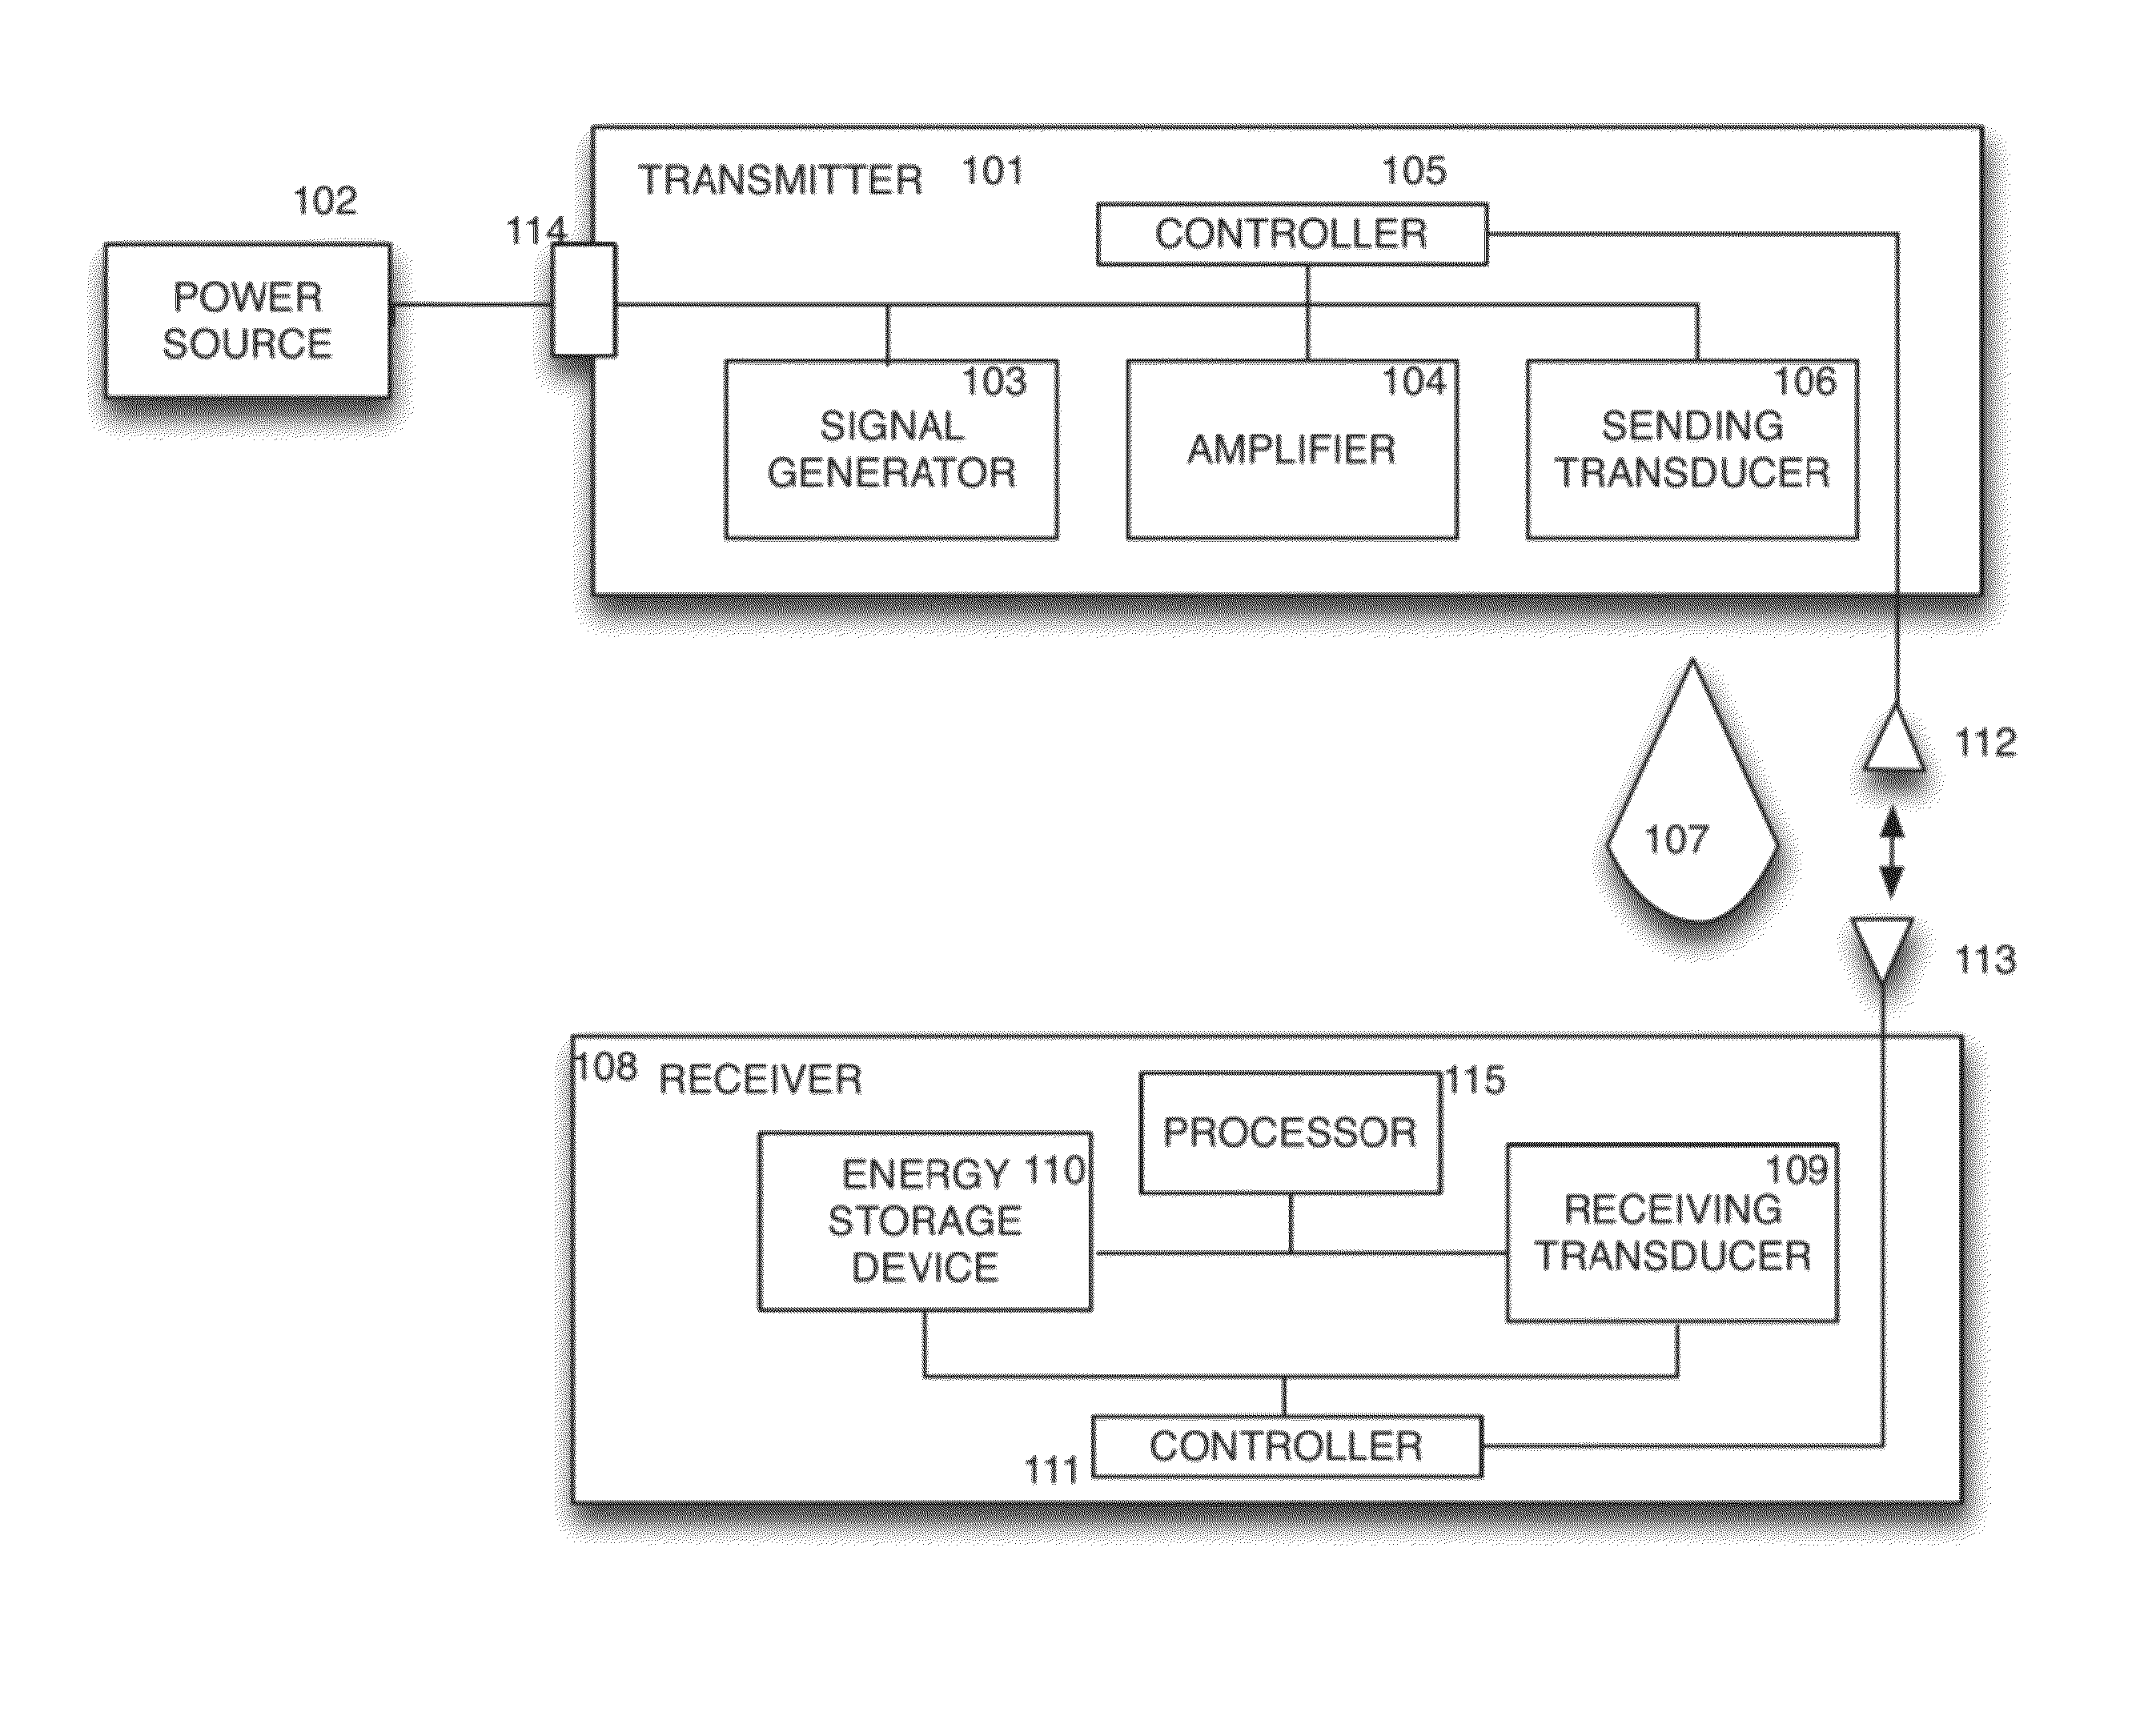 Receiver communications for wireless power transfer